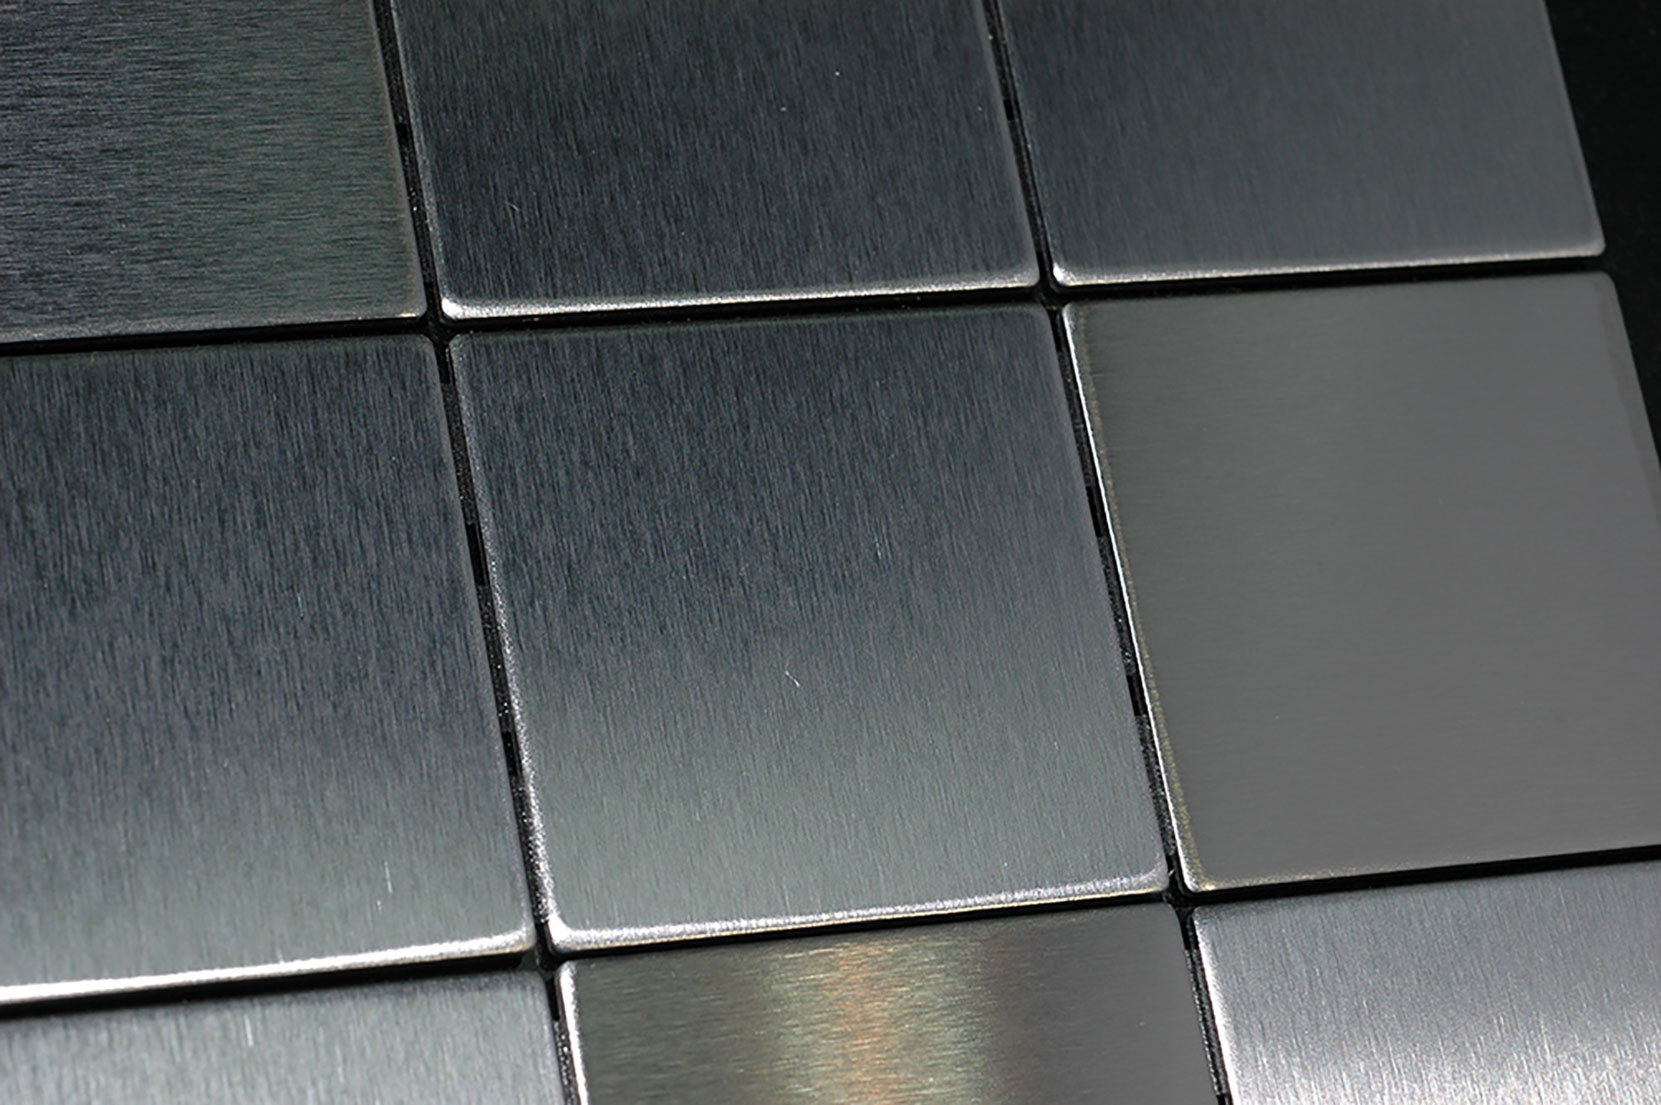 ATTICA Stainless Steel Brushed Tiles